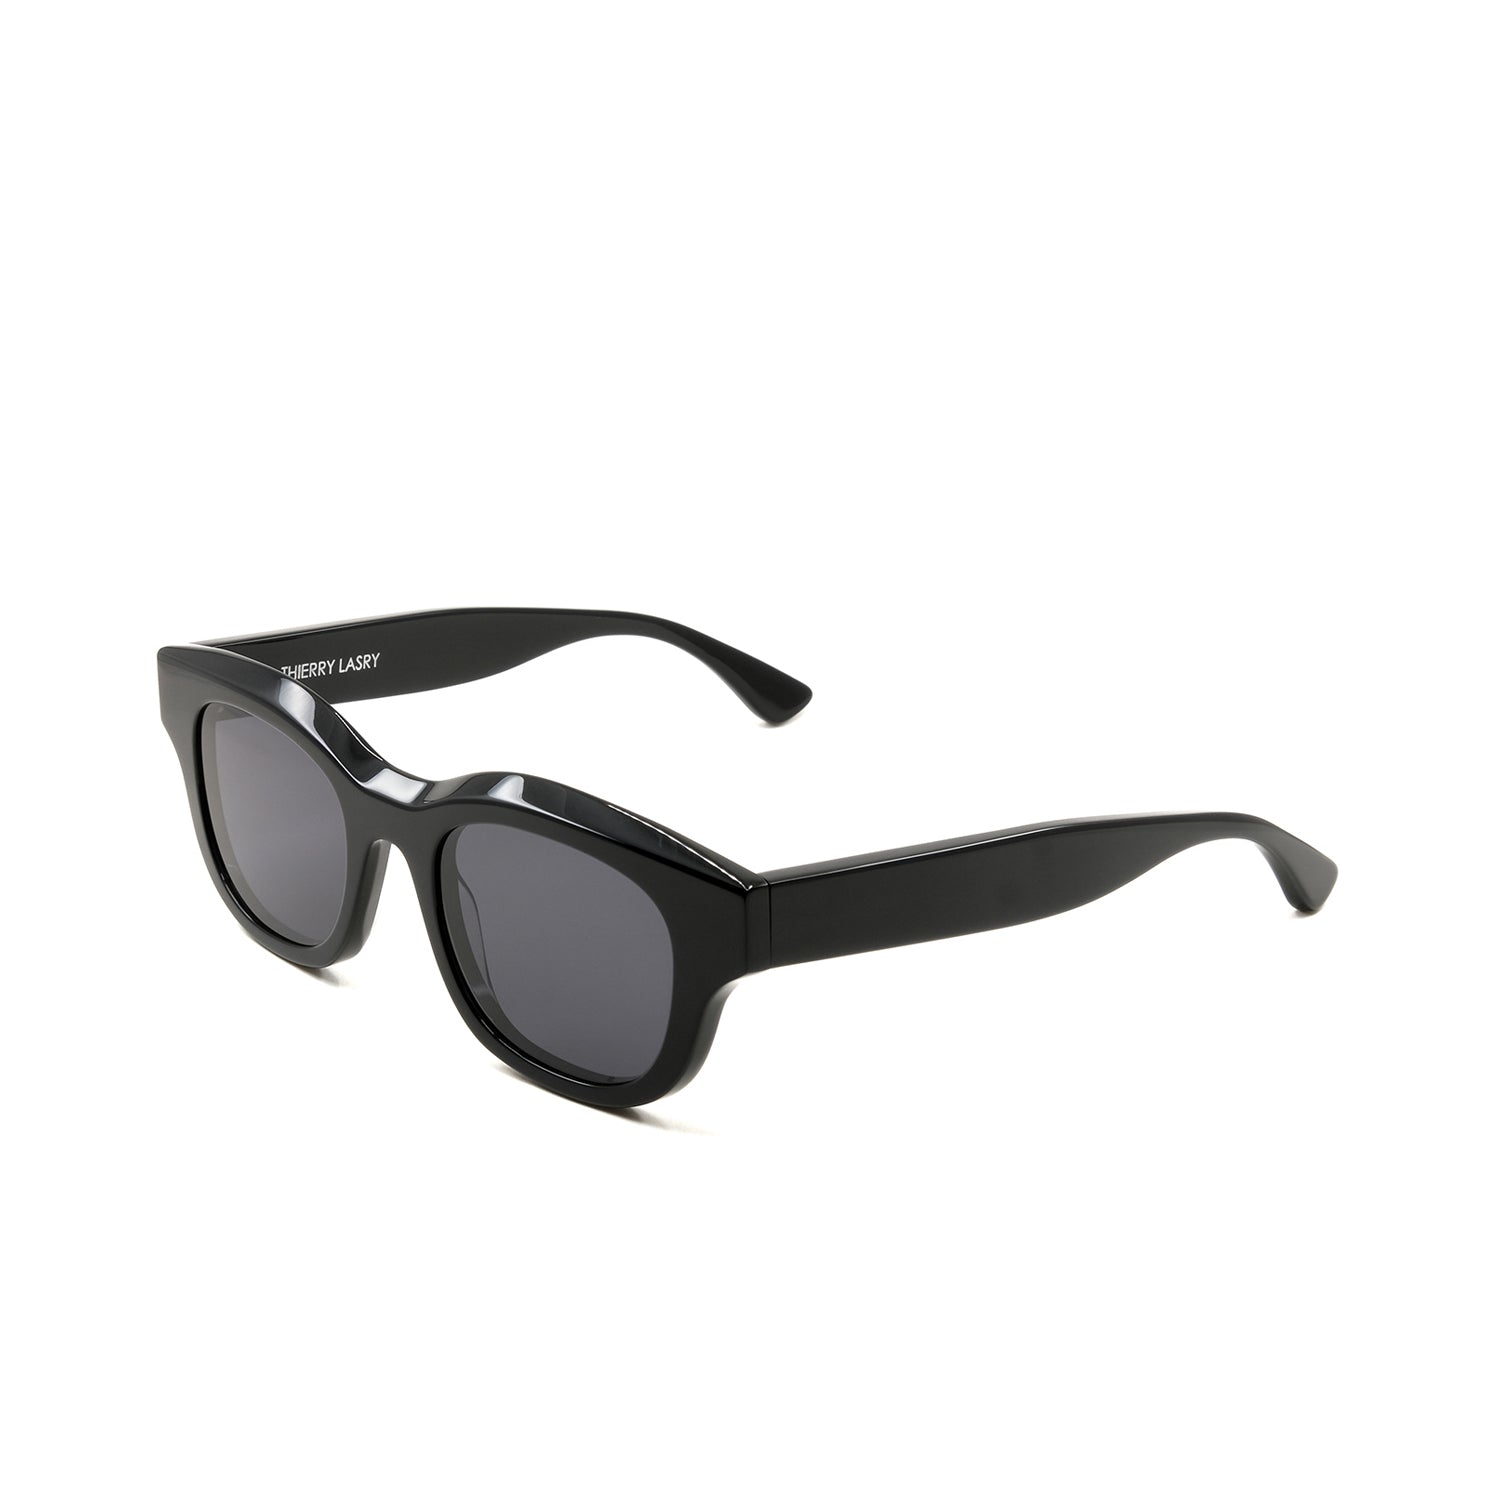 THIERRY LASRY DEADLY DESIGNER SUNGLASS